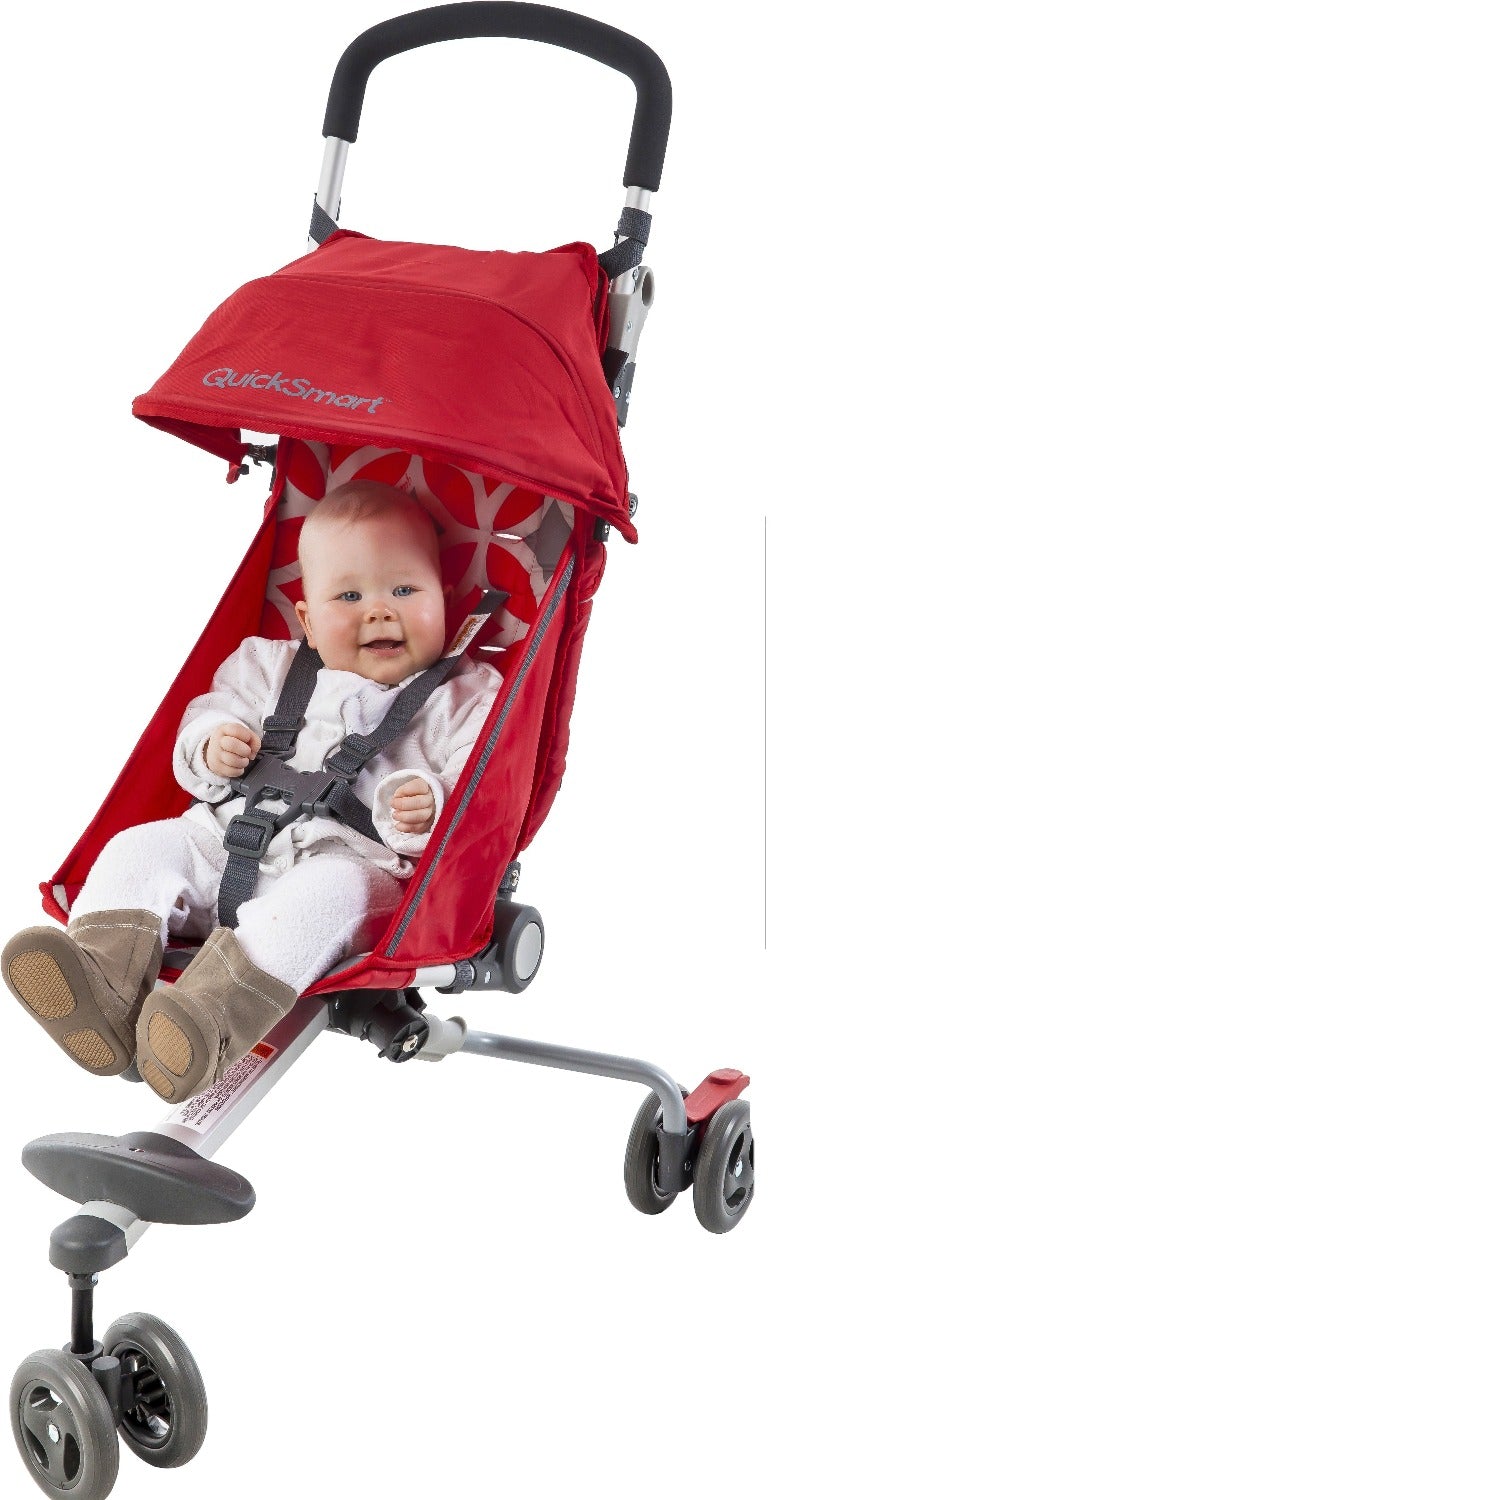 Playette Move Backpack Stroller - Red